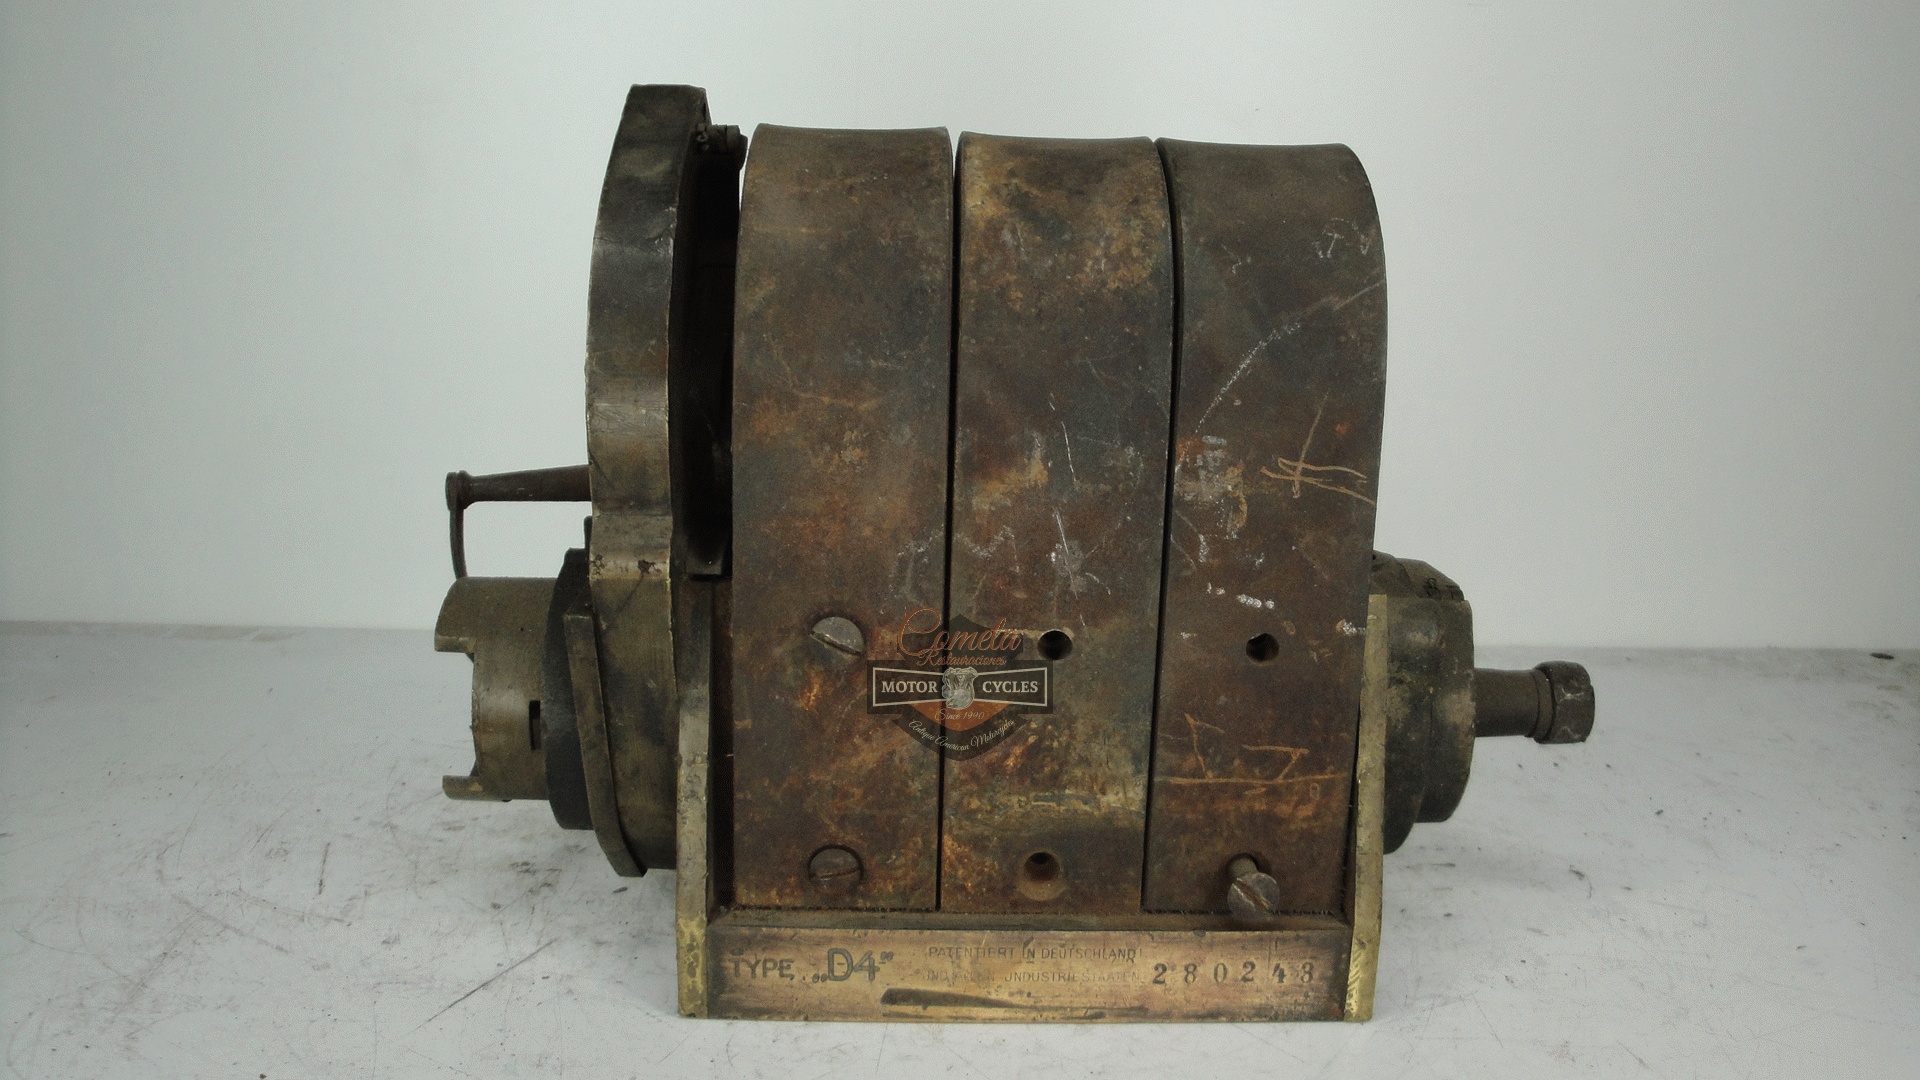 MAGNETO BOSCH TYPE D4 INCOMPLETA COCHE / TRACTOR / CAMION  AÑOS 1905 A 1910 